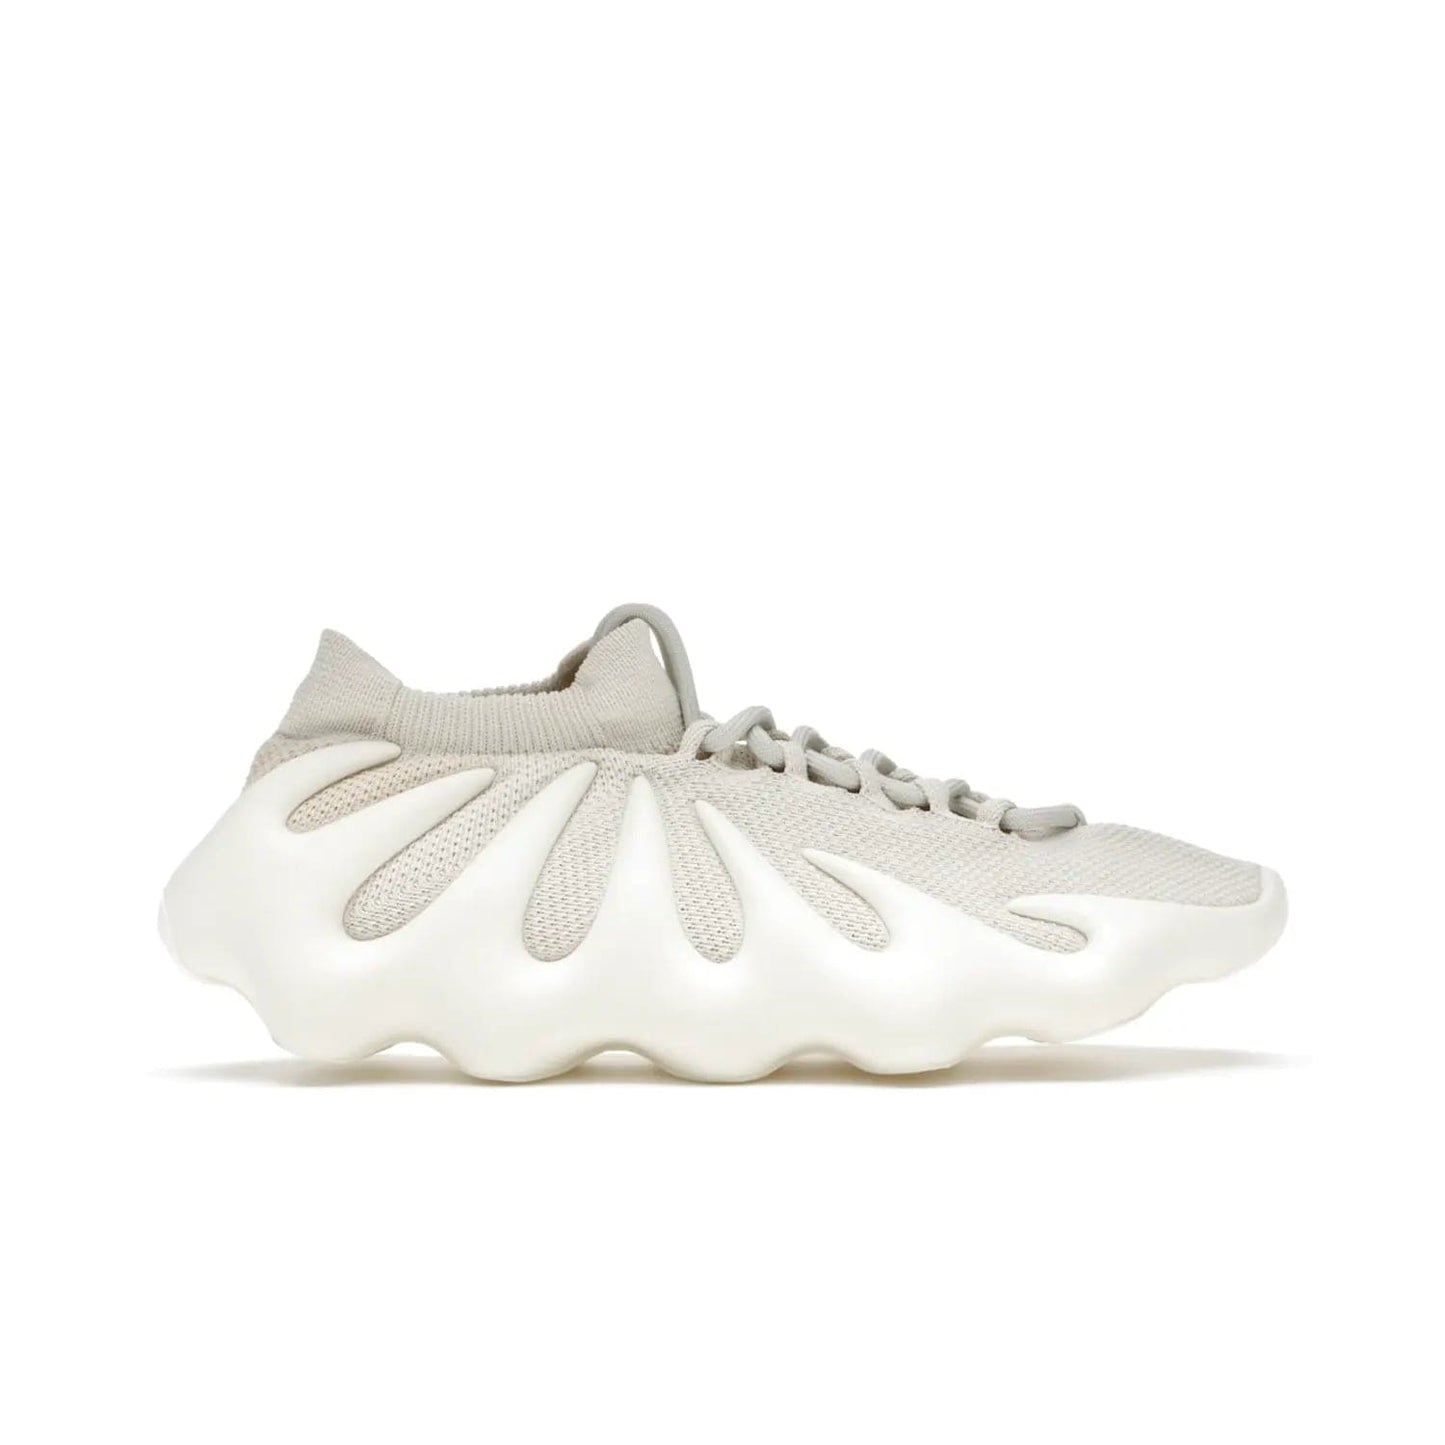 adidas Yeezy 450 Cloud White - Image 1 - Only at www.BallersClubKickz.com - Experience the future with the adidas Yeezy 450 Cloud White. A two-piece design featuring an extreme foam sole and mesh upper, this silhouette is expected to release in March 2021. Get your hands on this striking Cloud White/Cloud White colorway and stand out in the crowd.